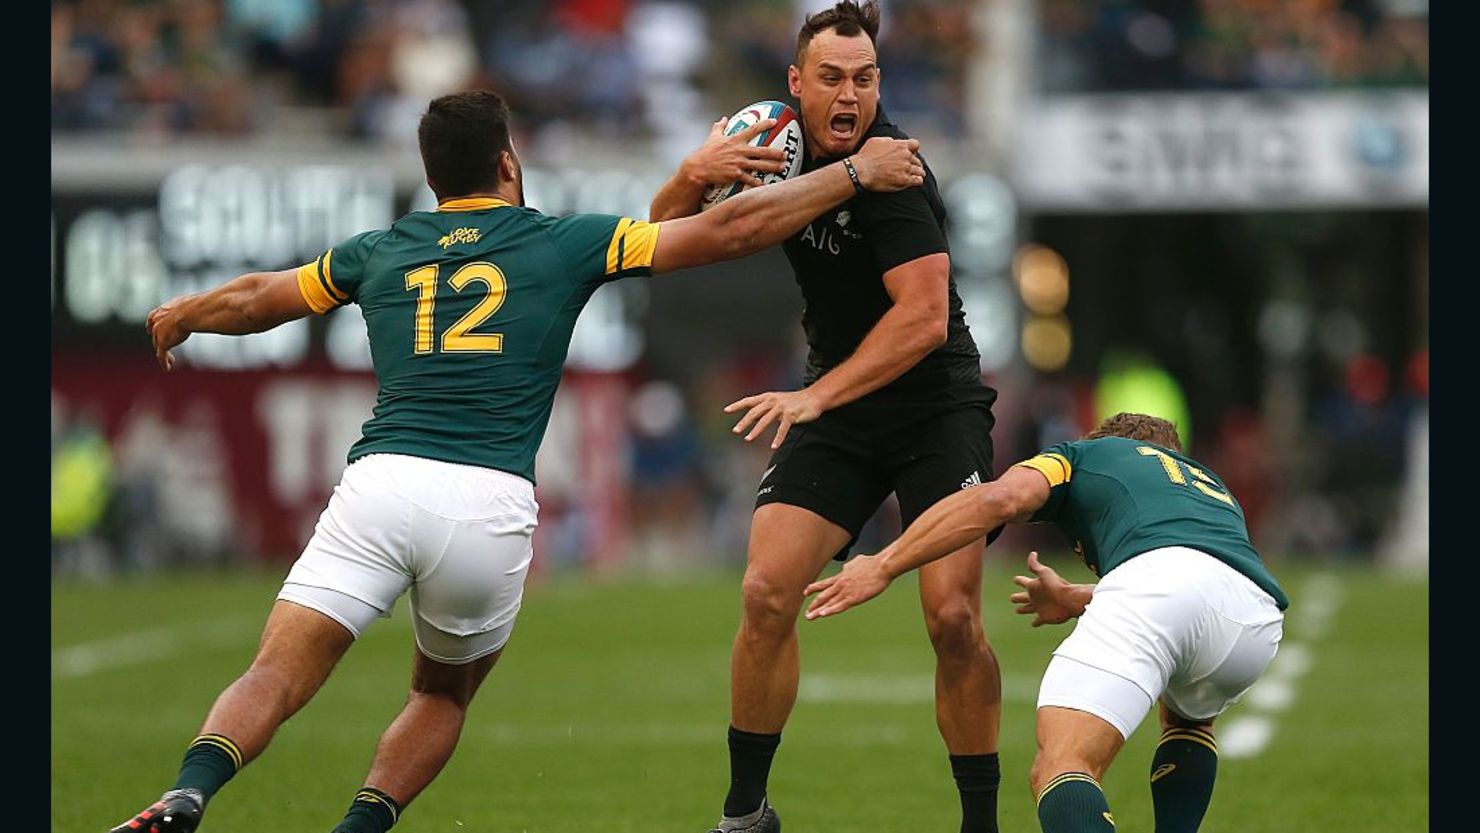 New Zealand's Israel Dagg scored twice as the All Blacks earned a record-equaling 17th consecutive win.